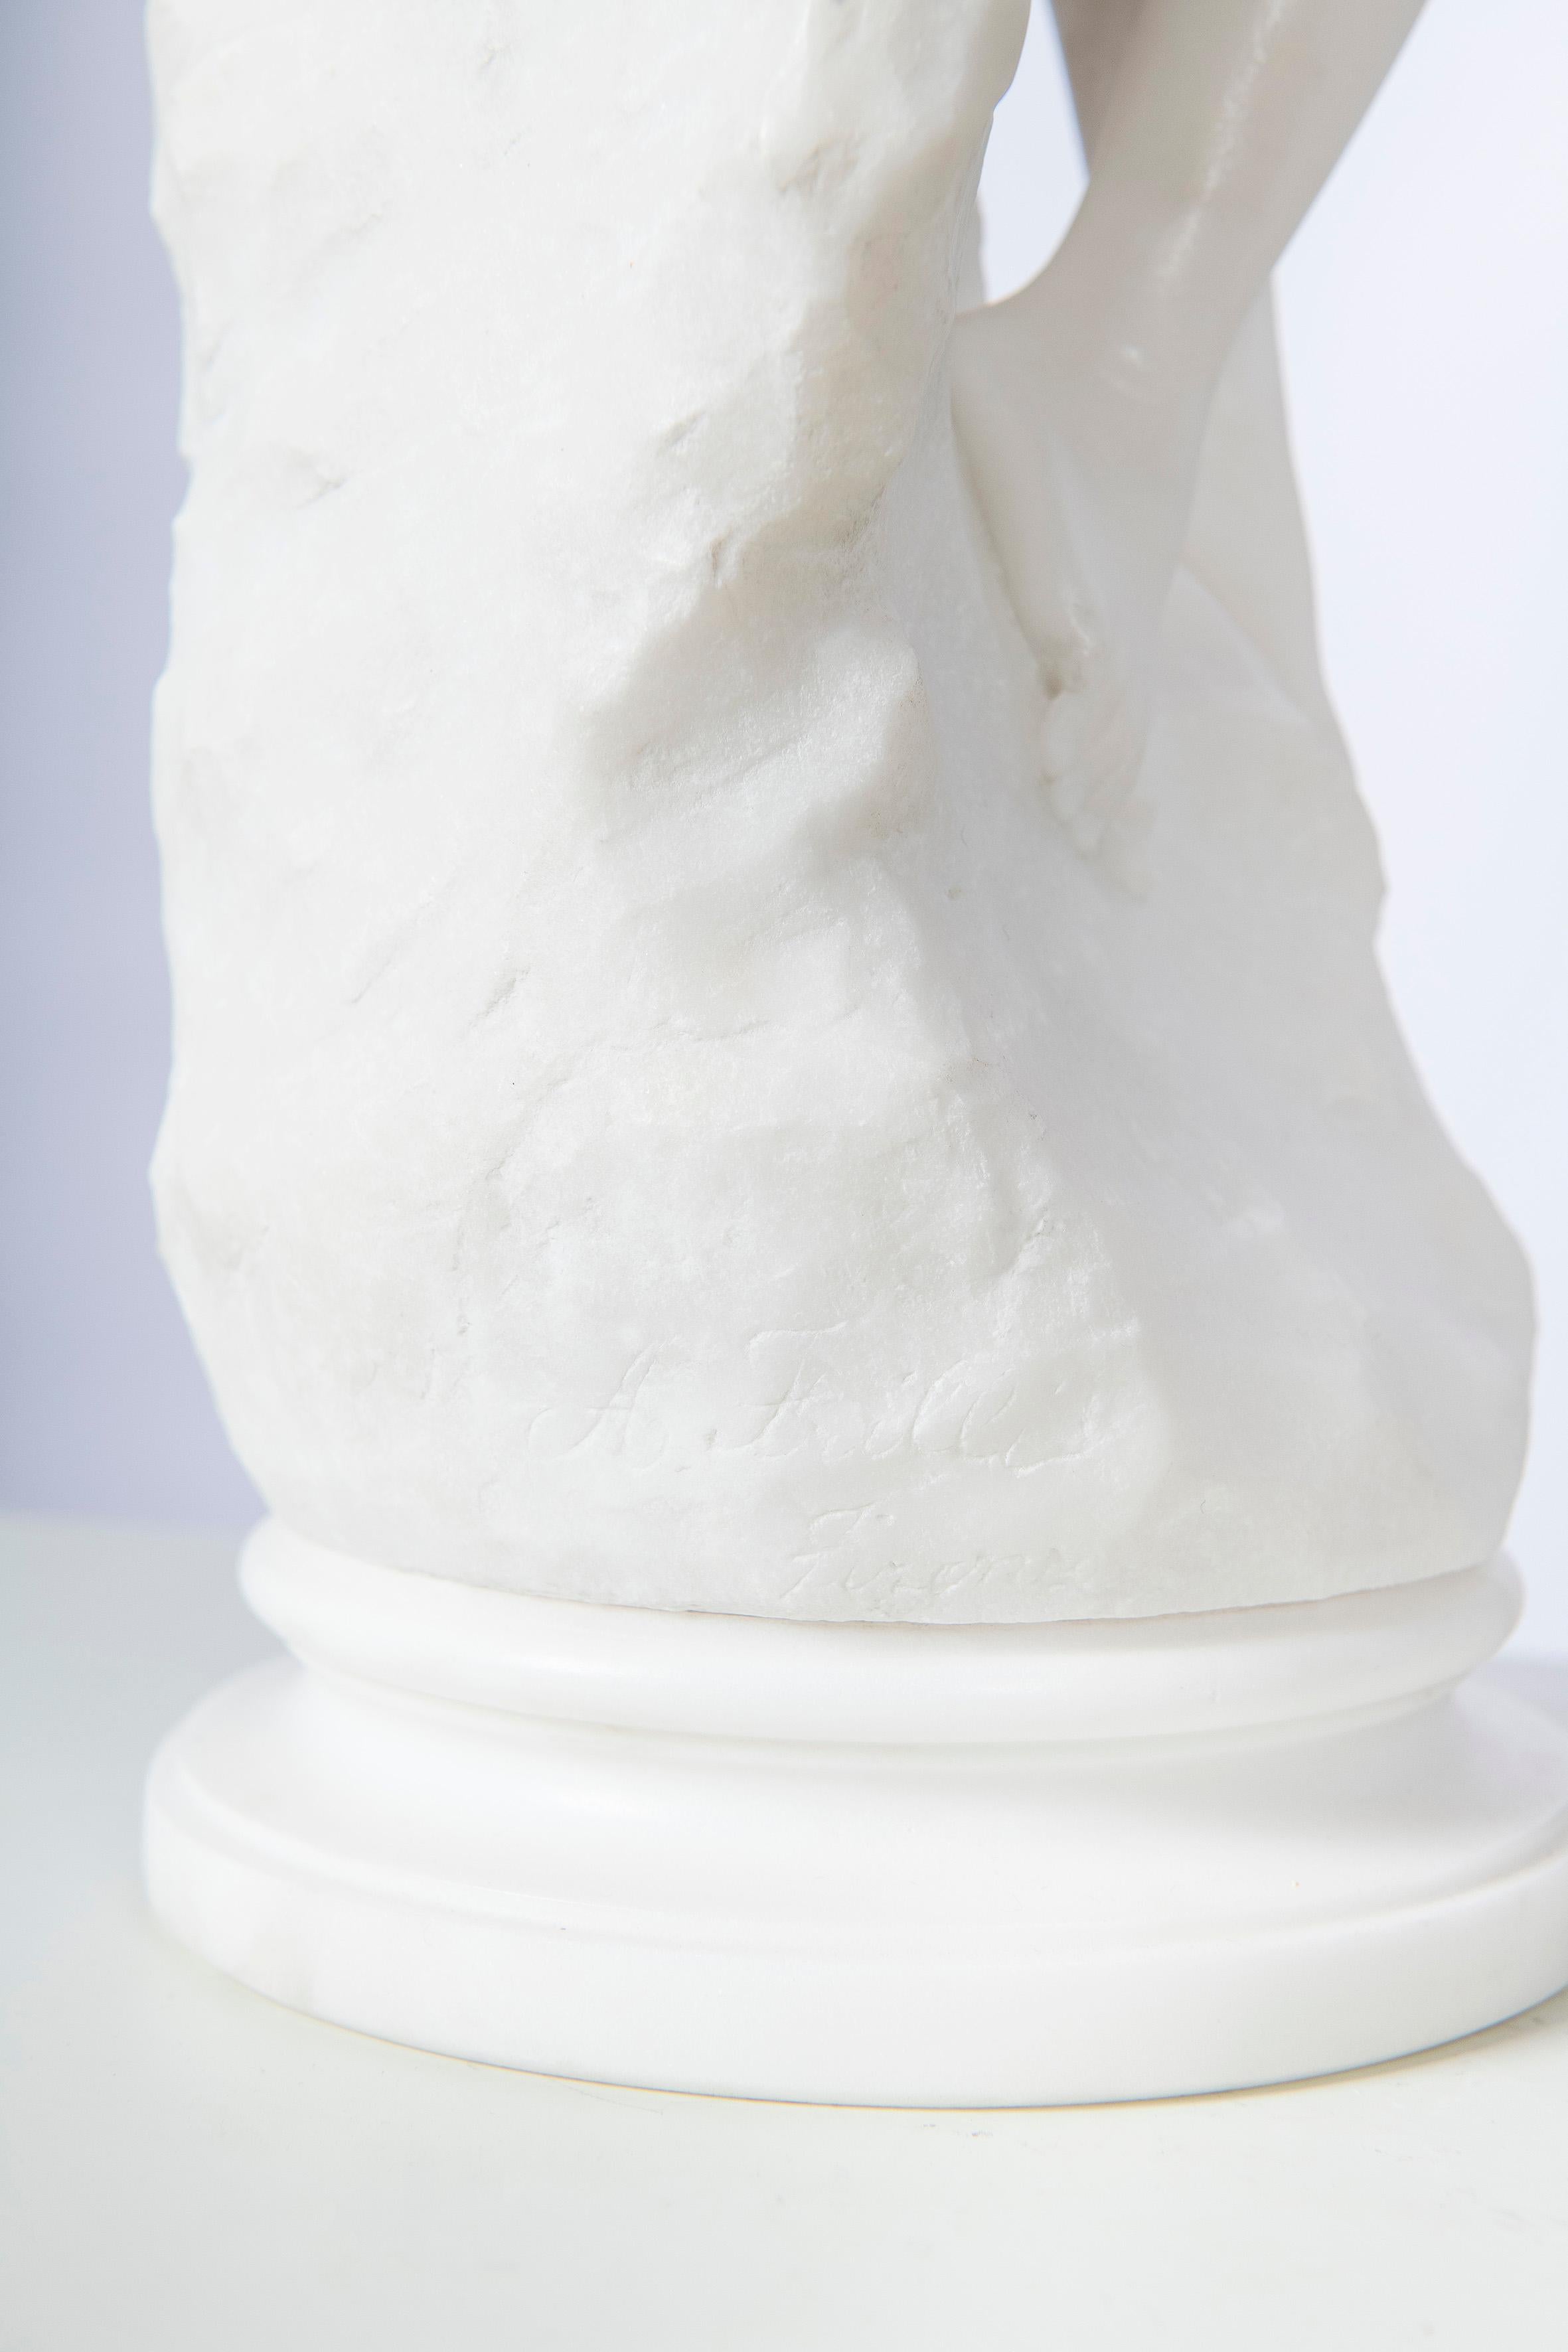 Carrara Marble Sculpture by Antonio Frilli, Firenze, circa 1890 In Good Condition For Sale In Buenos Aires, Buenos Aires